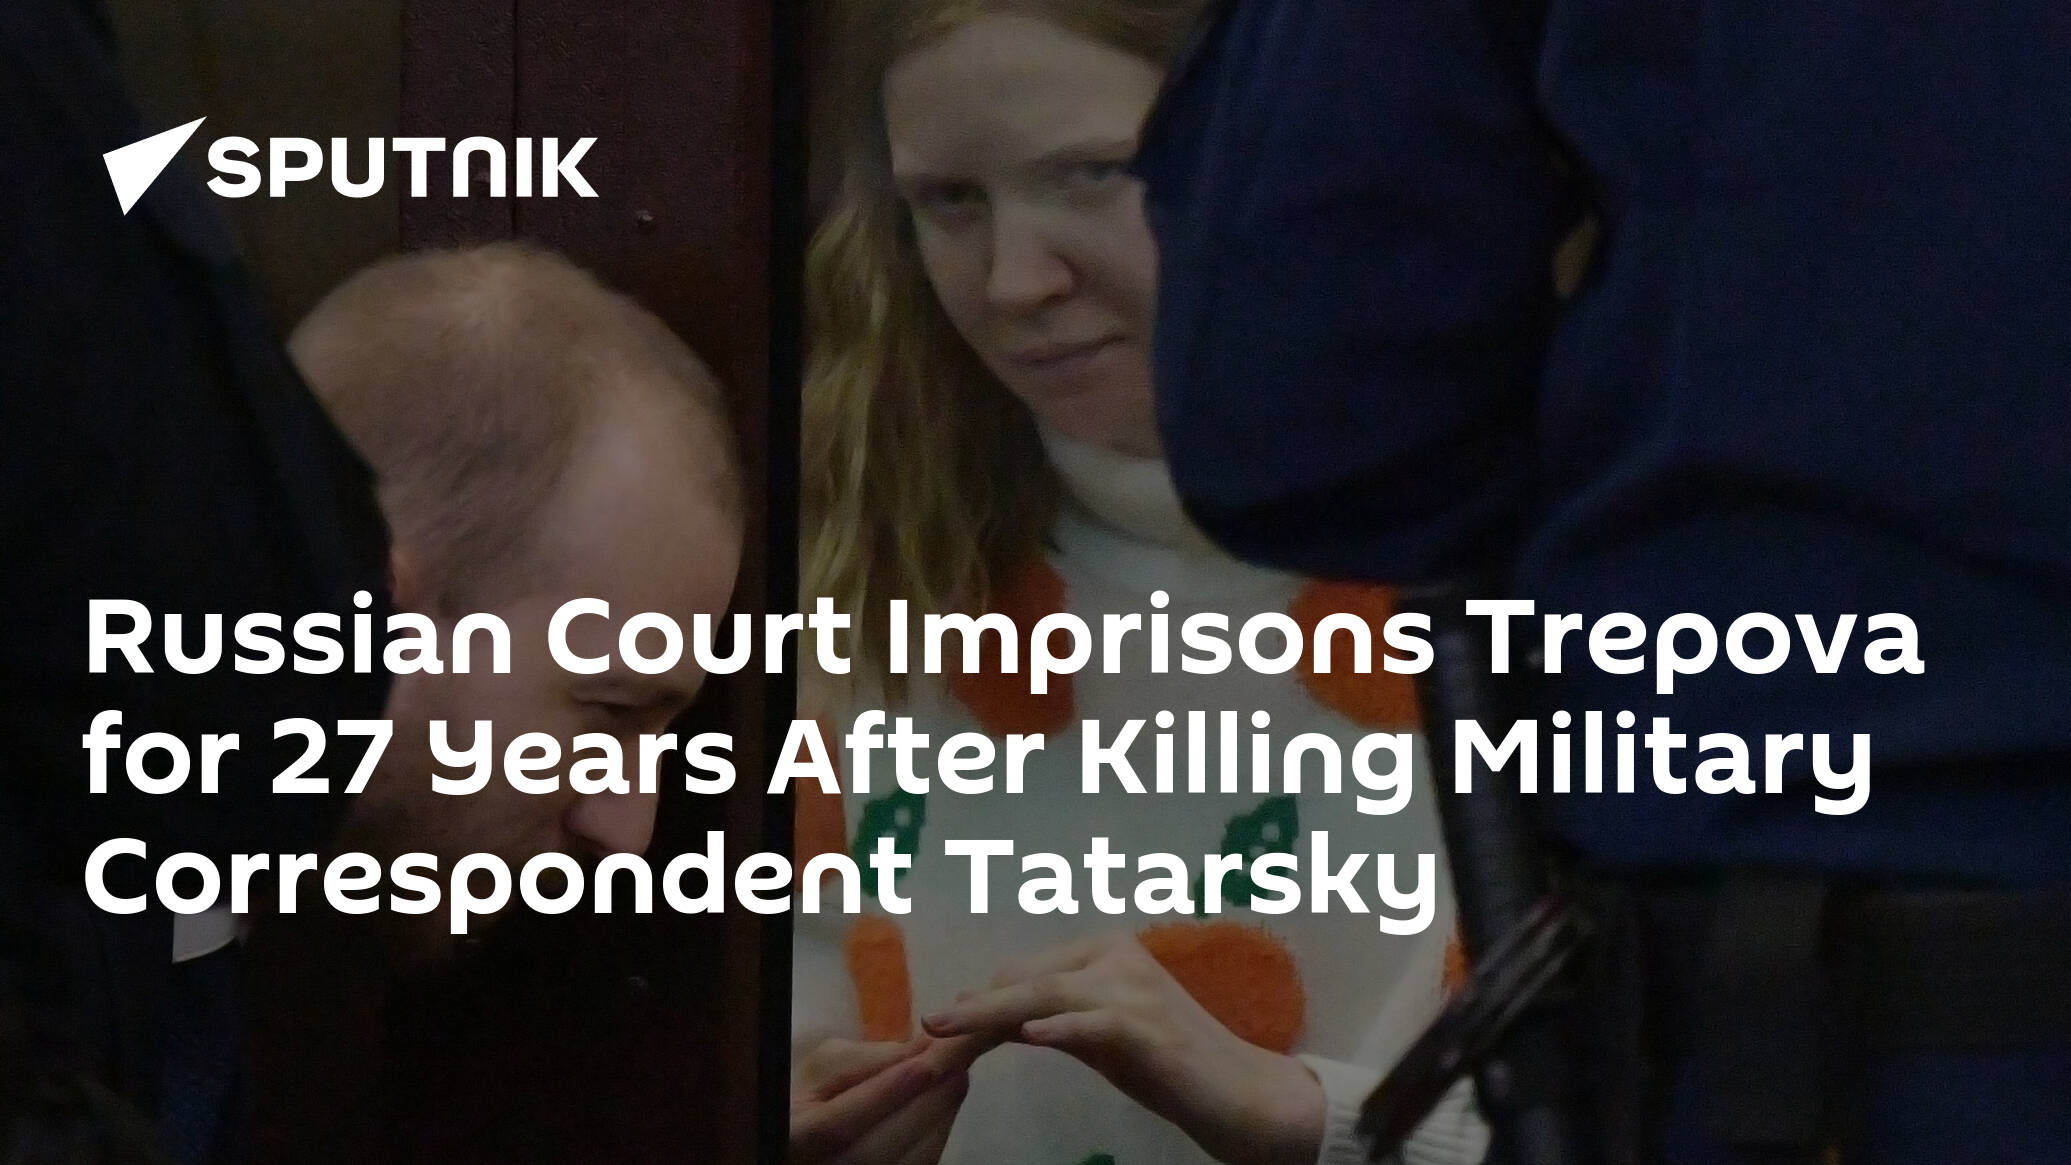 Russian Court Imprisons Trepova for 27 Years After Killing Military Correspondent Tatarsky